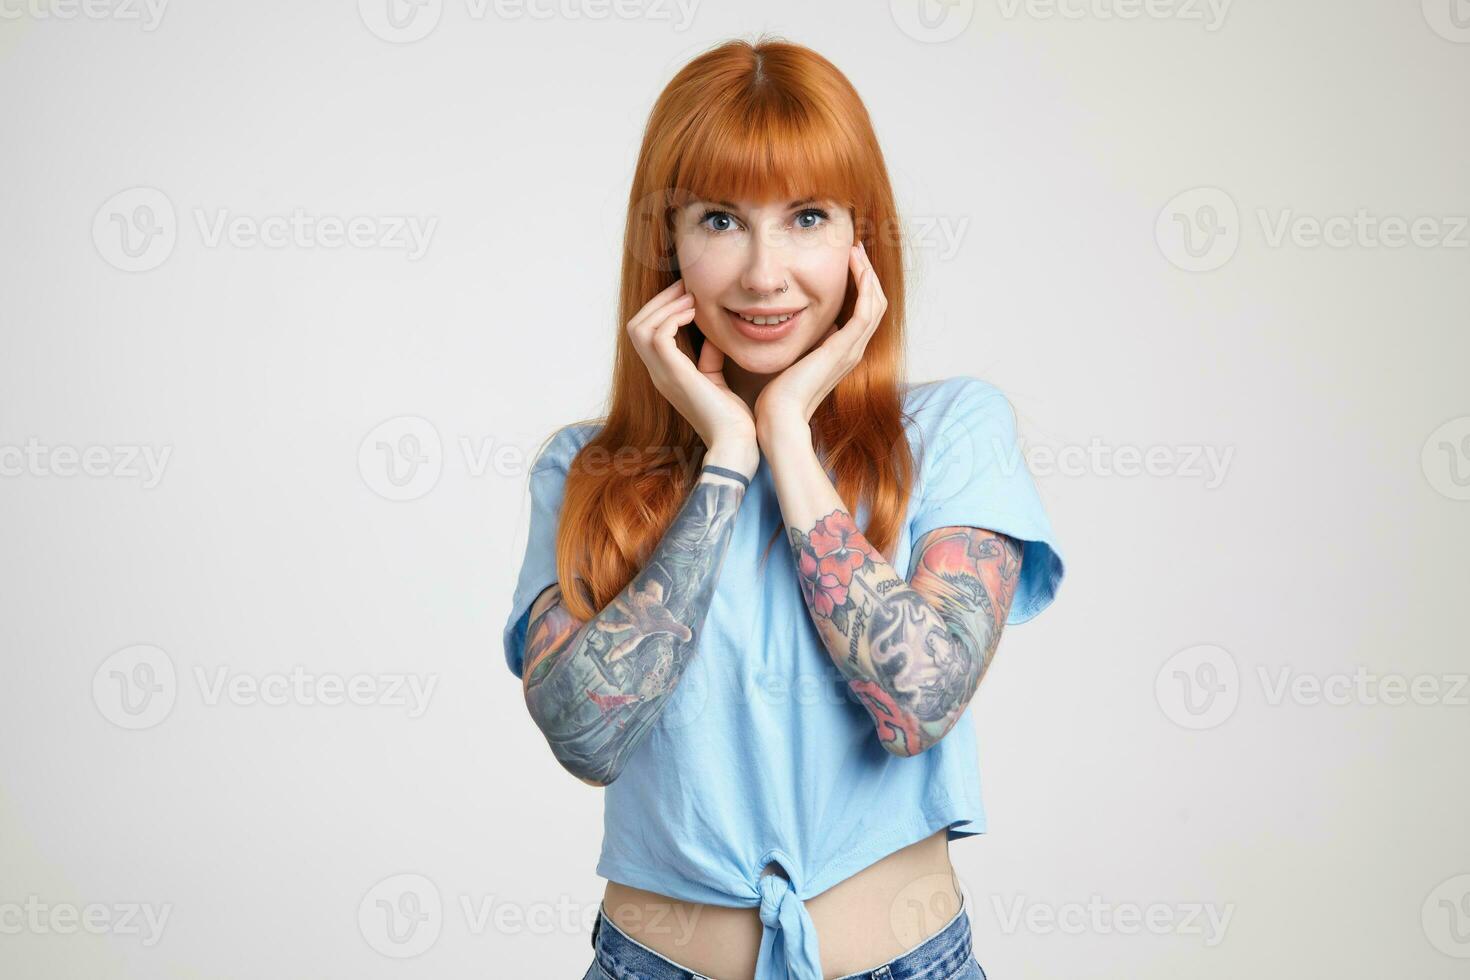 Indoor shot of young beautiful long haired redhead female holding her face with raised hands while smiling gladly at camera, isolated over white background photo